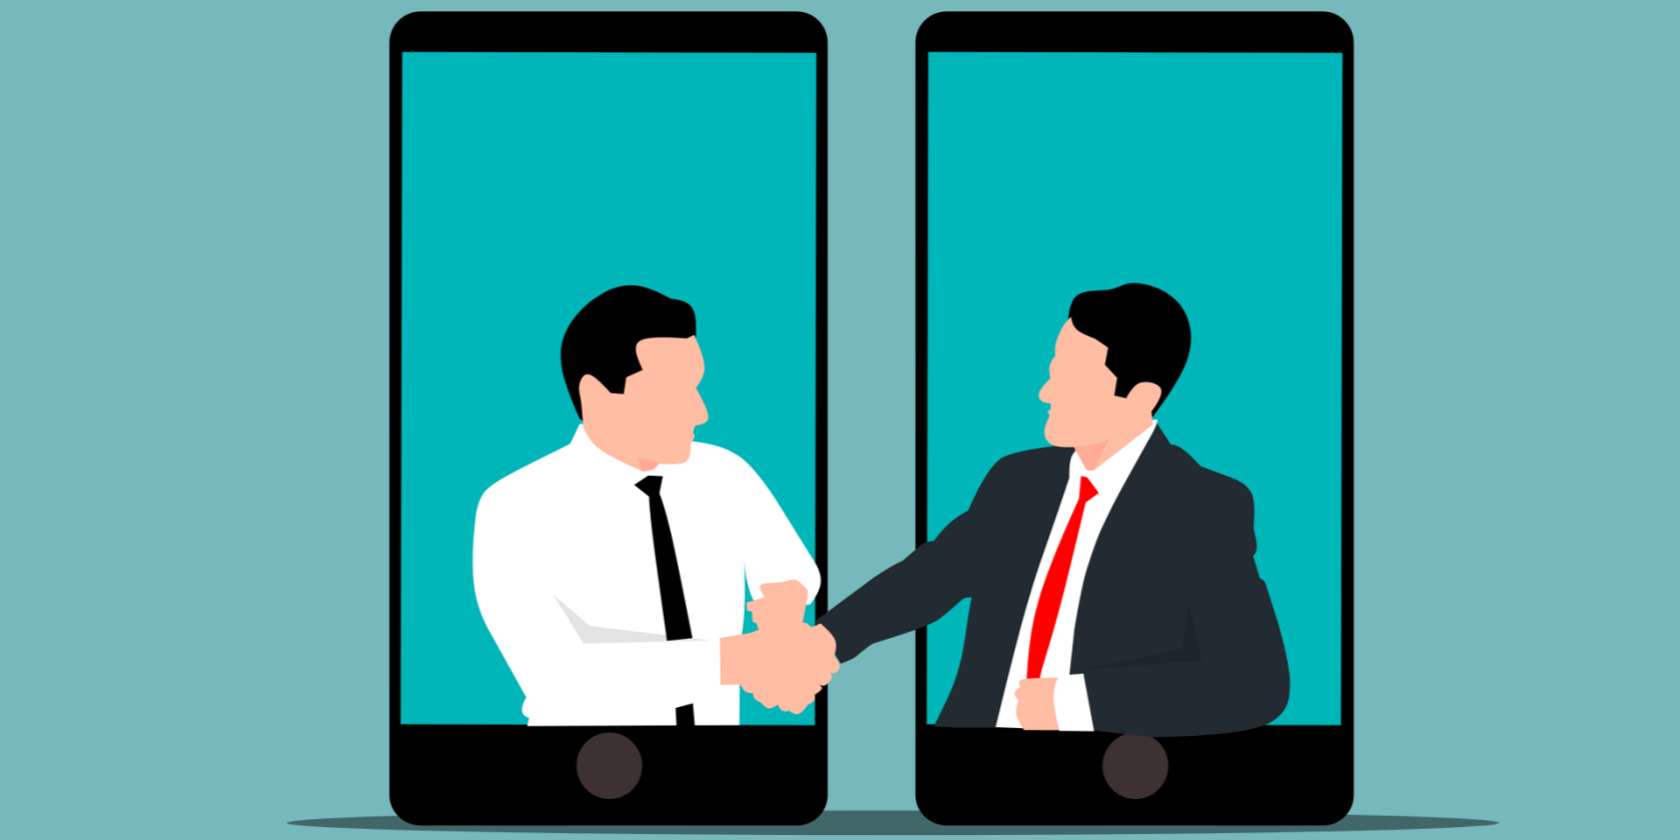 Vector image of two men shaking hands coming out of mobile phones